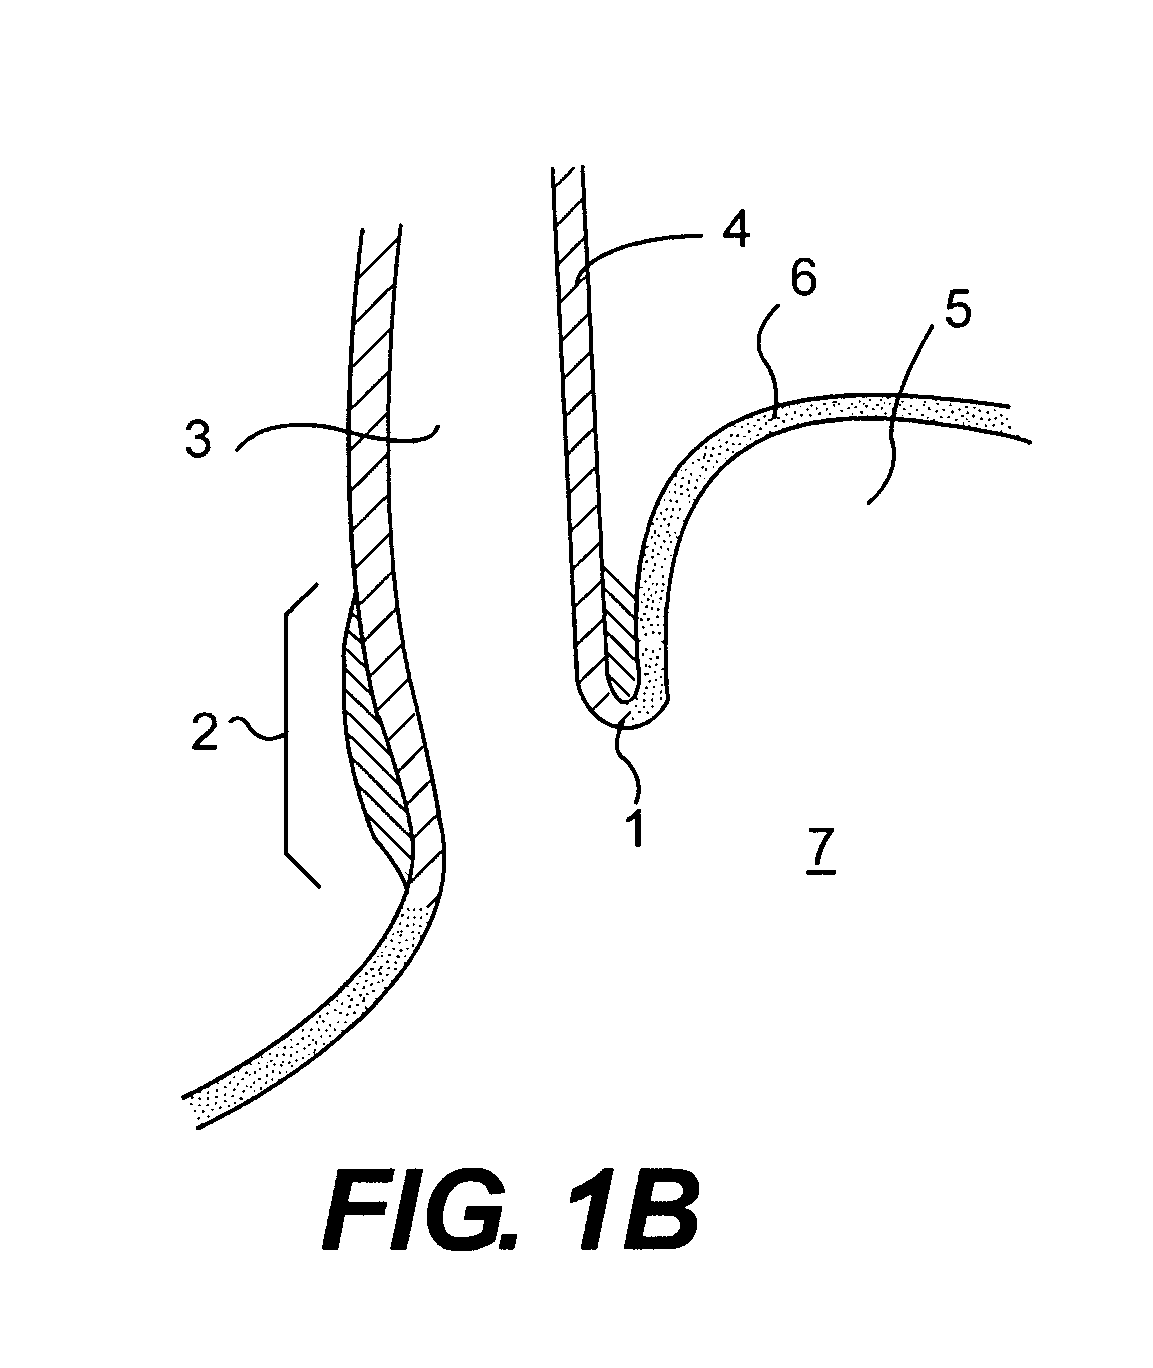 Endoscopic fundoplication devices and methods for treatment of gastroesophageal reflux disease